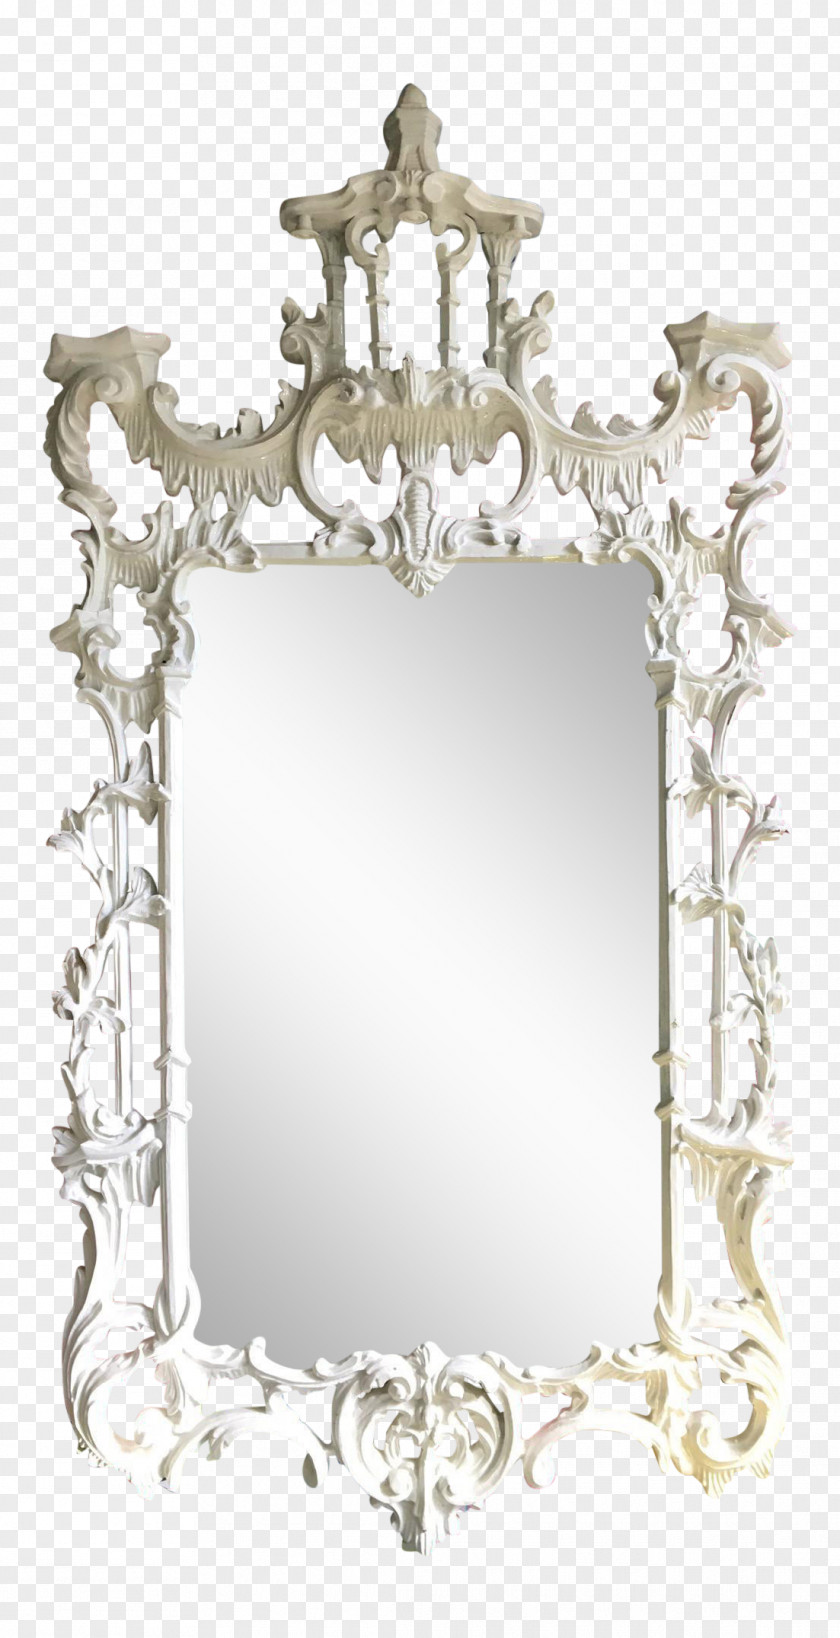 Chinese Chippendale Mirror Design Hollywood Regency 1stdibs.Com, Inc. PNG